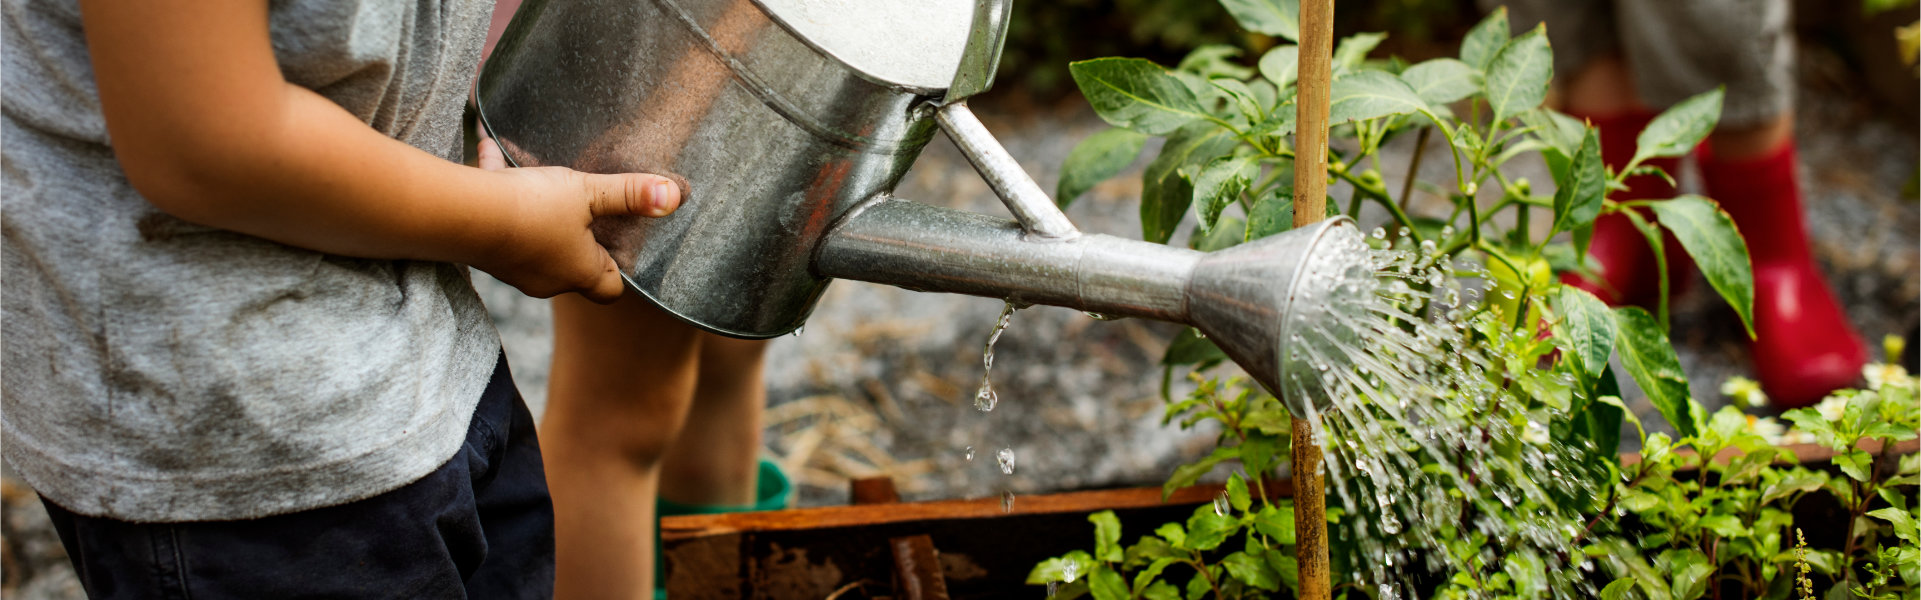 A child using a watering can to tend vegetables.